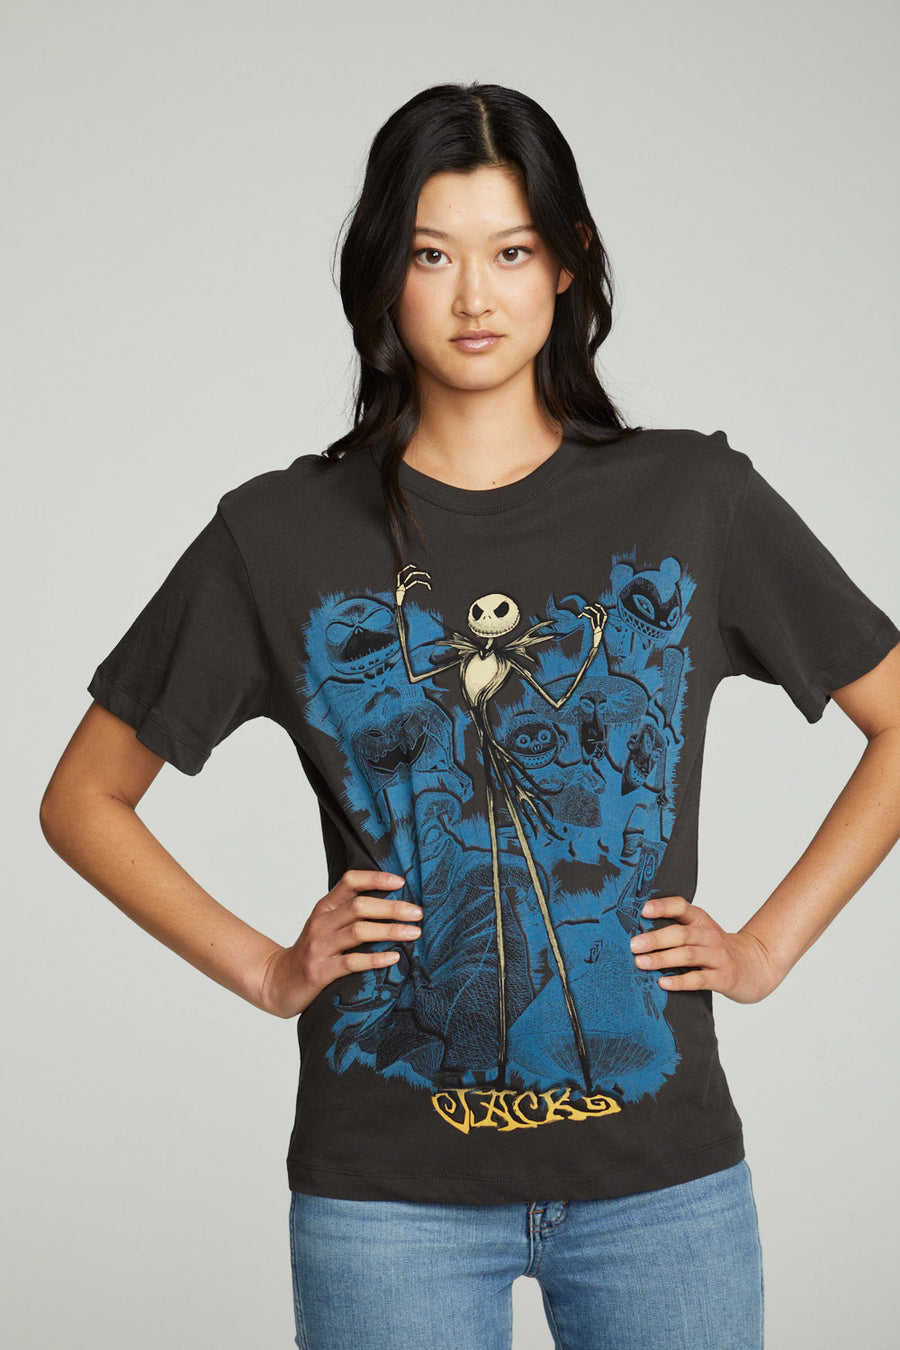 The Nightmare Before Christmas - Jack WOMENS chaserbrand